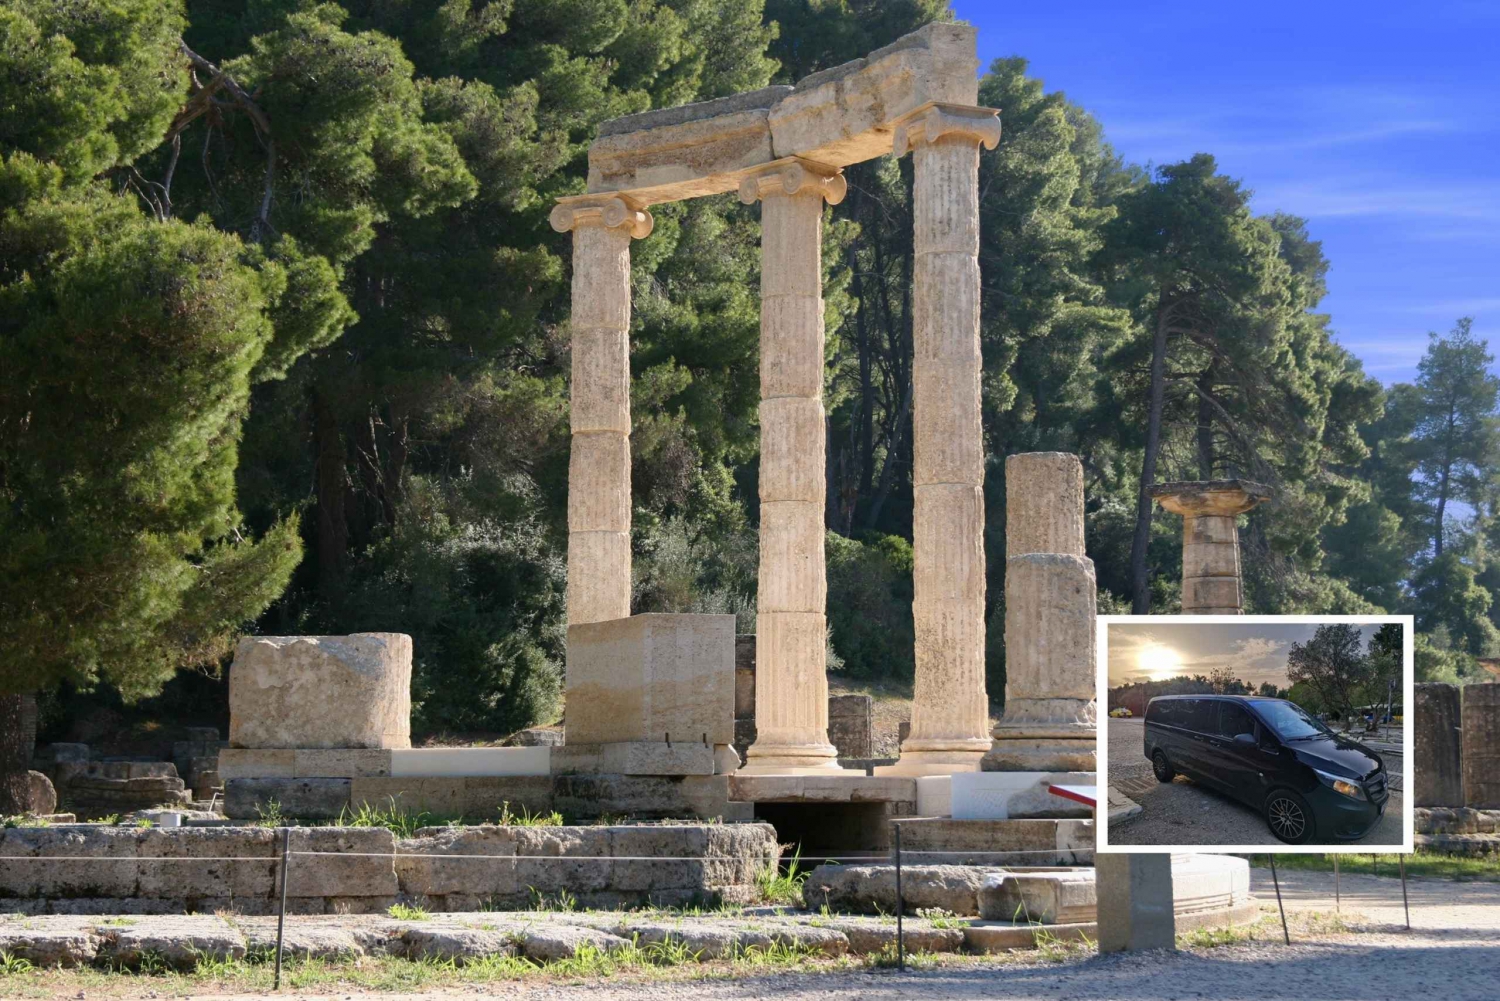 From Athens: Olympia and Corinth Canal Private Tour